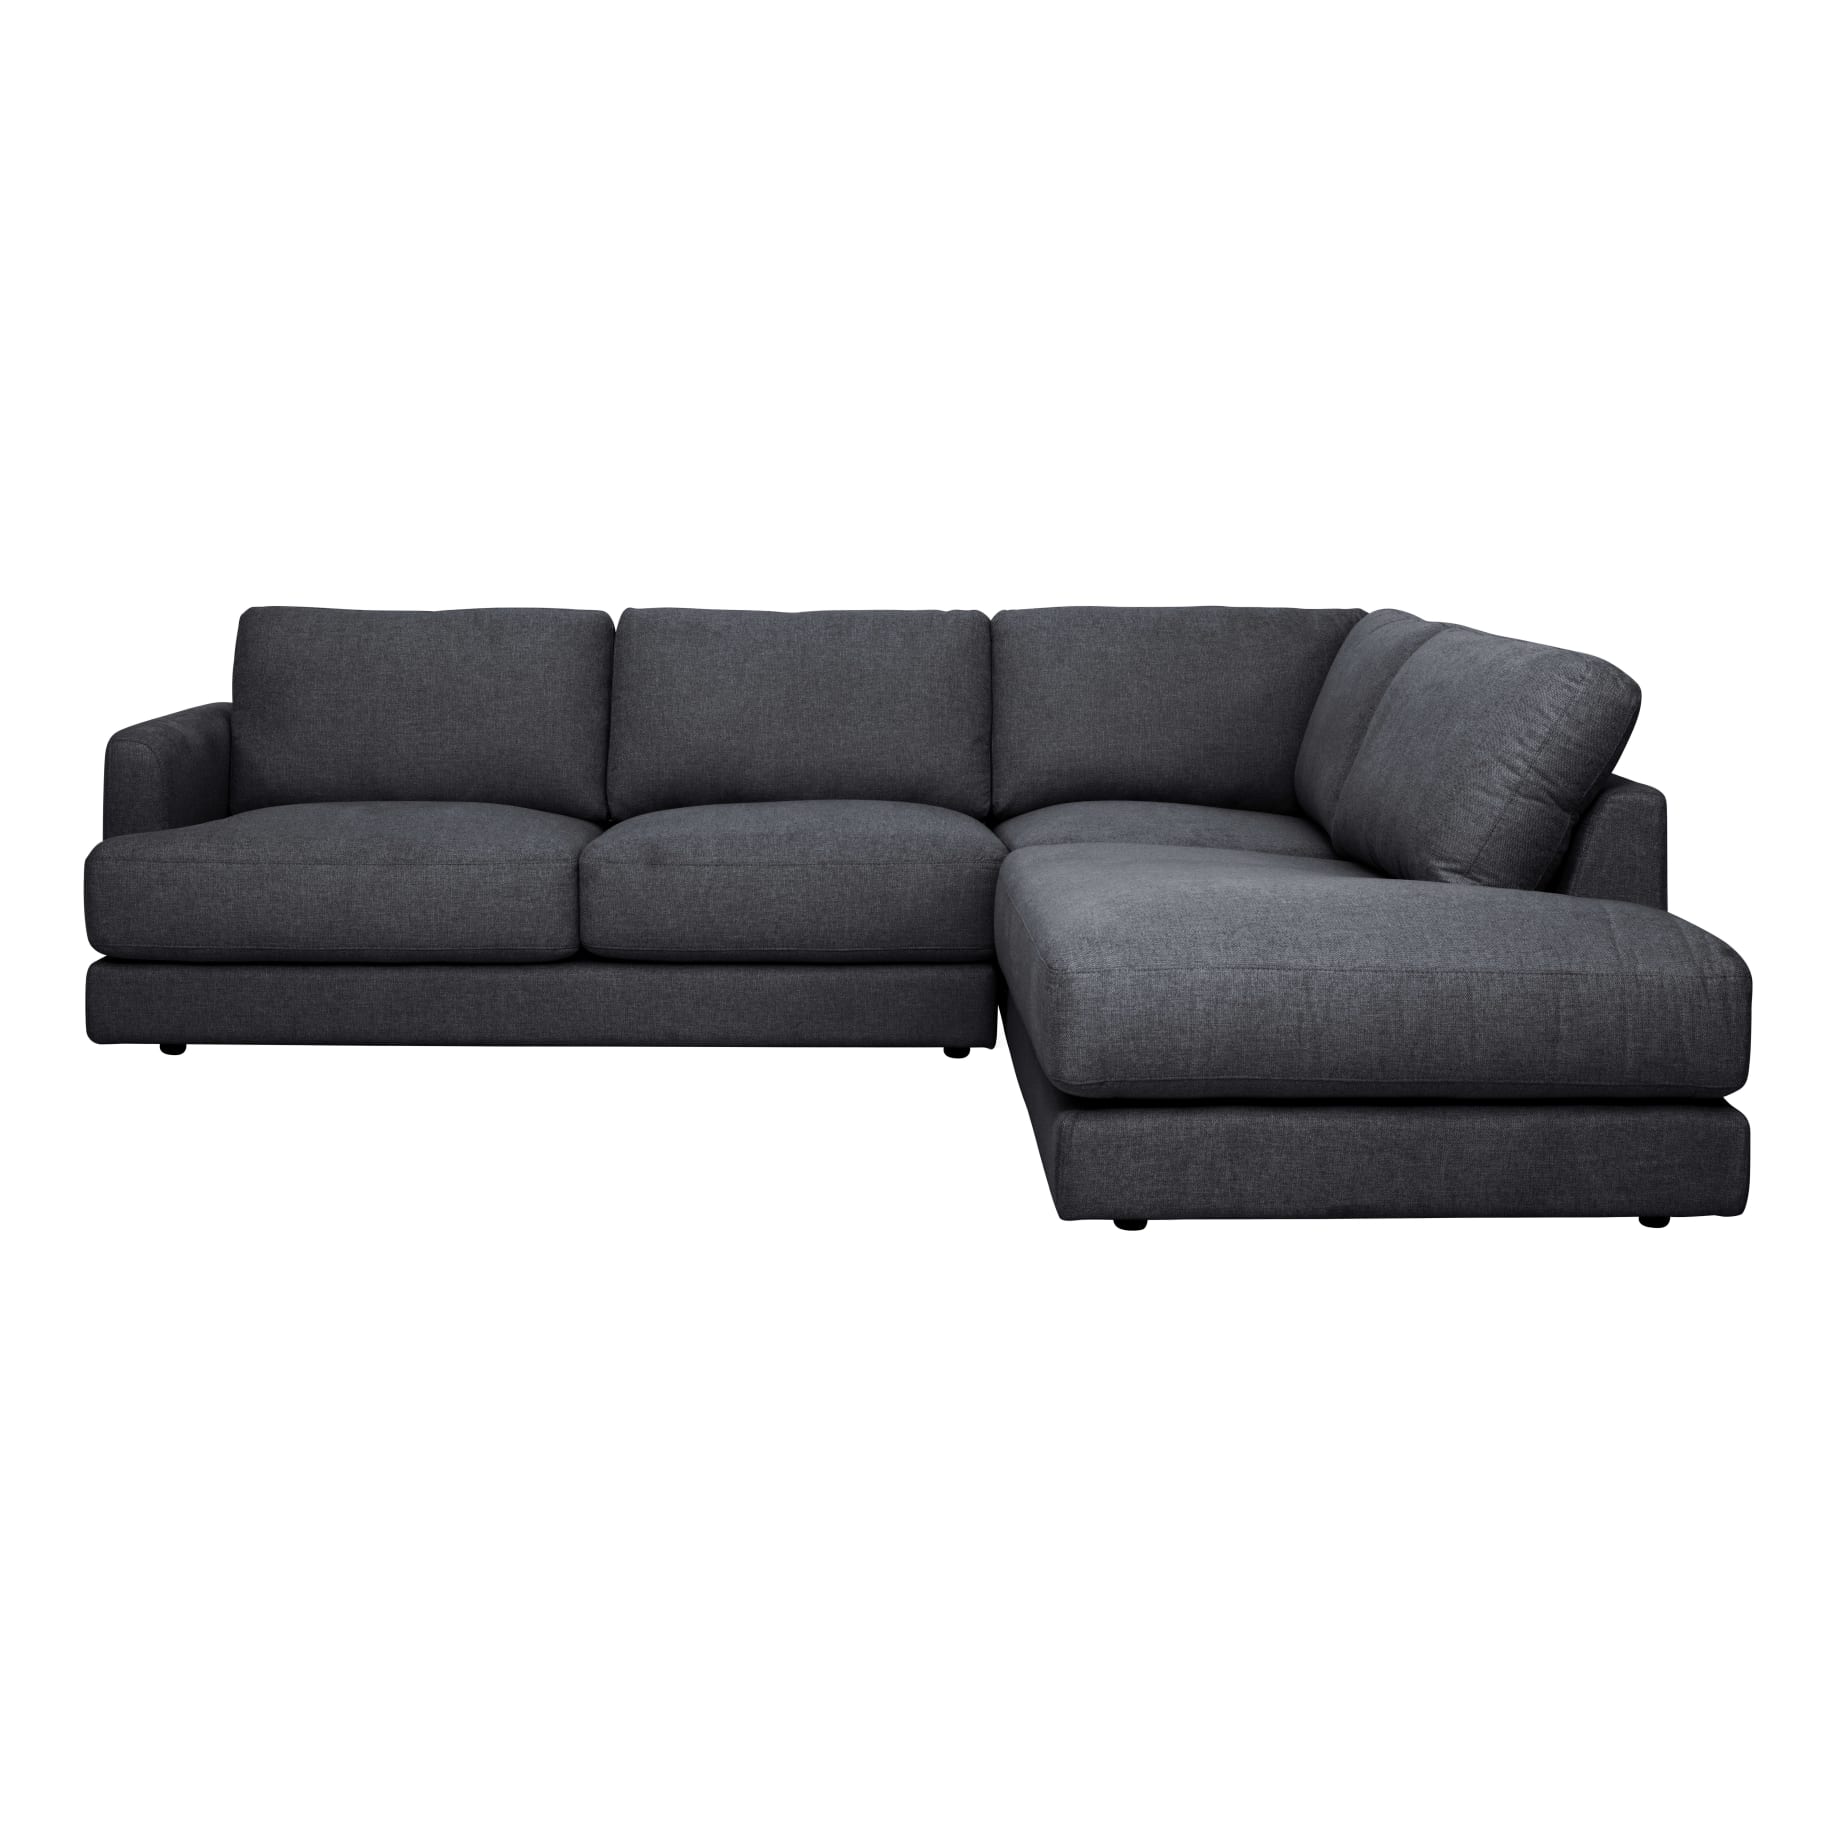 Temple Corner Chaise RHF in Belfast Charcoal